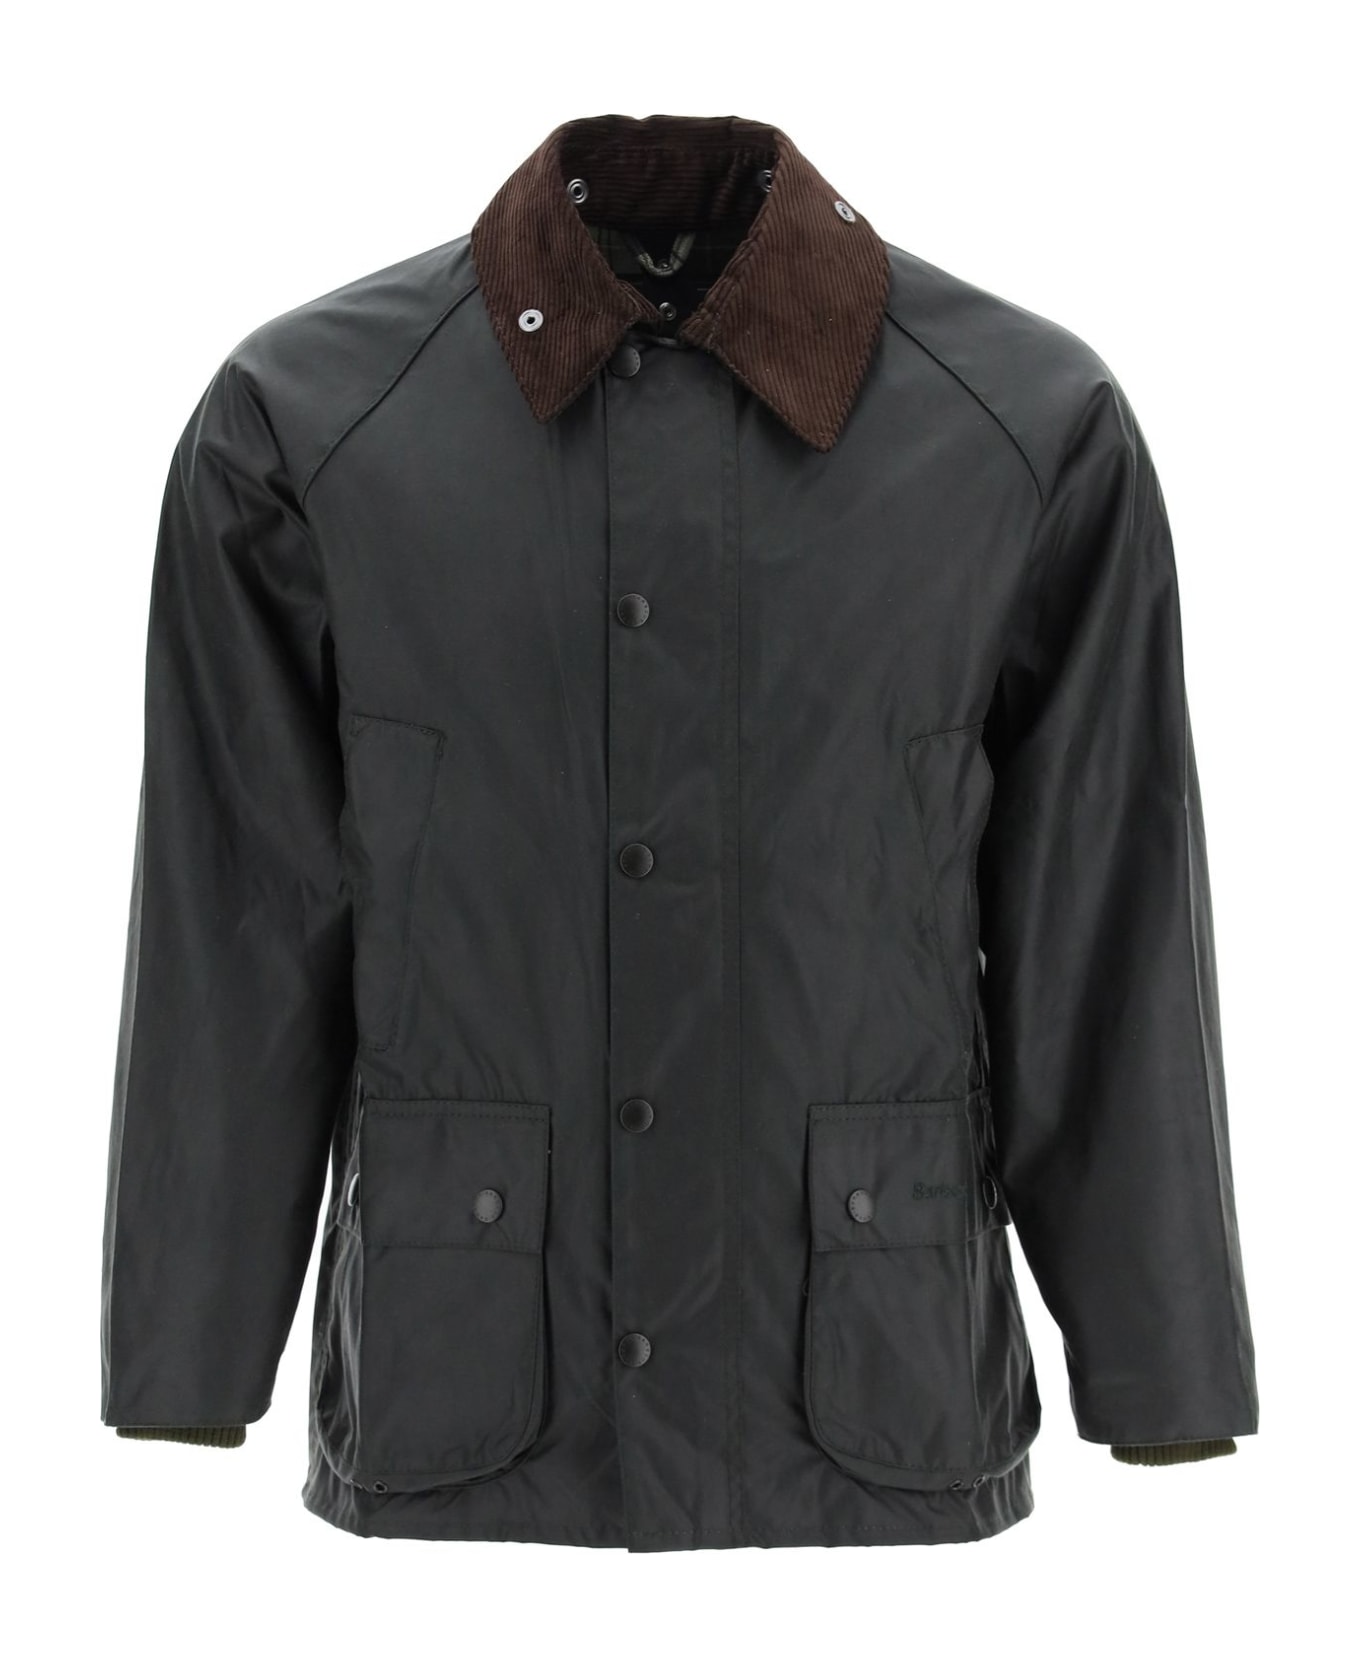 Barbour Classic Bedal Jacket In Waxed Cotton - Sage